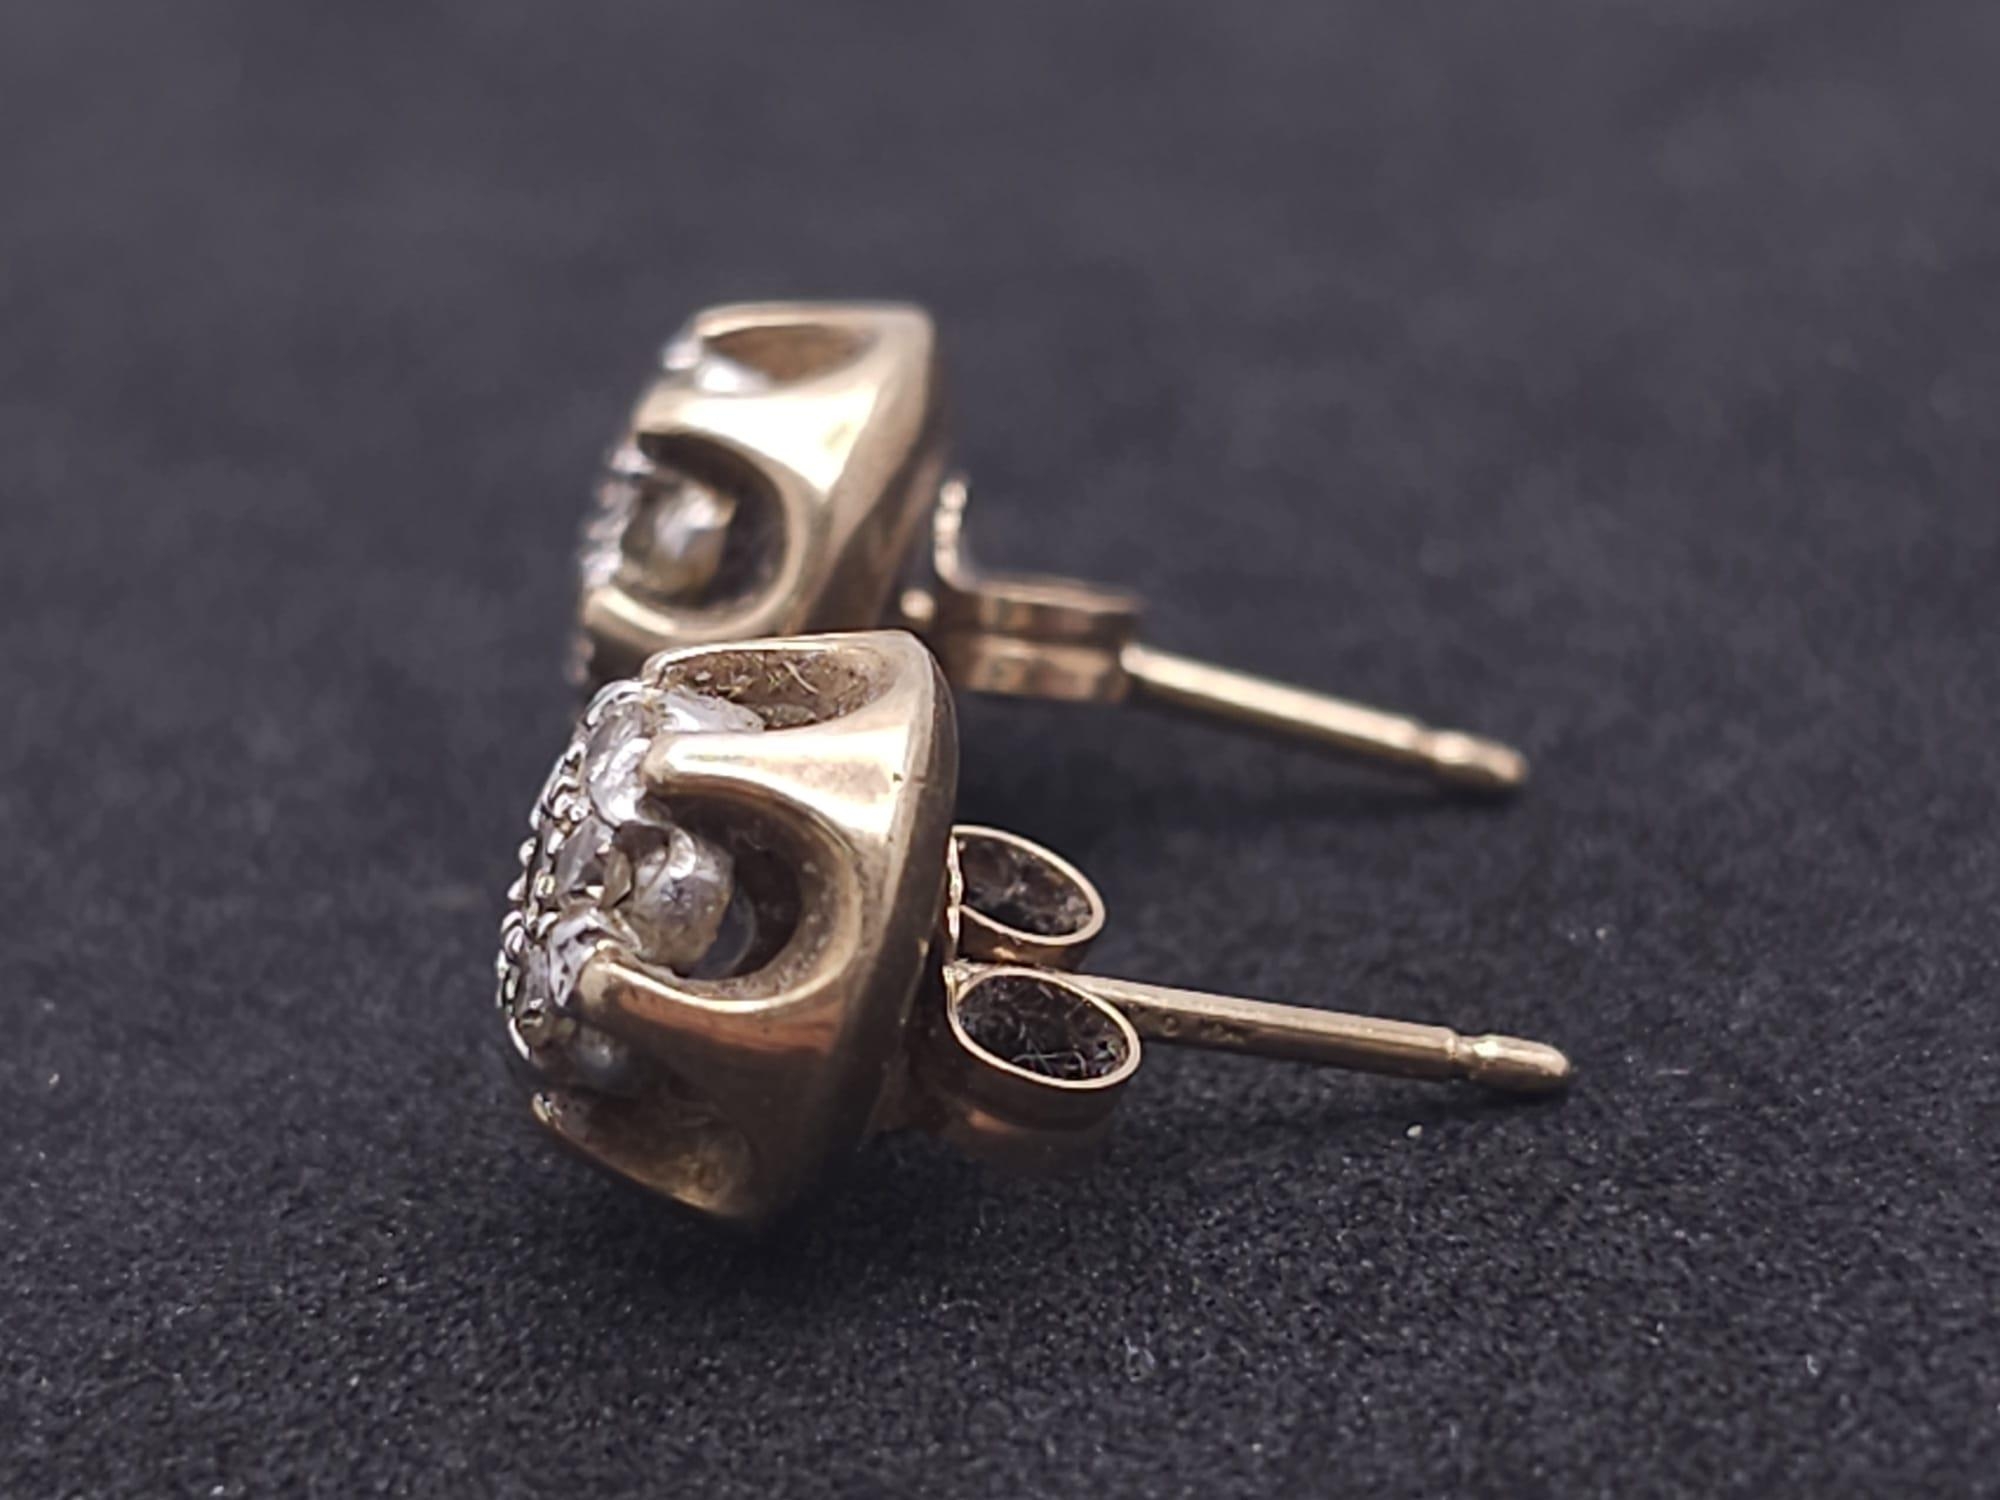 A Pair of Vintage 9K Yellow Gold and Diamond Stud Earrings. 3.3g total weight. - Image 6 of 10